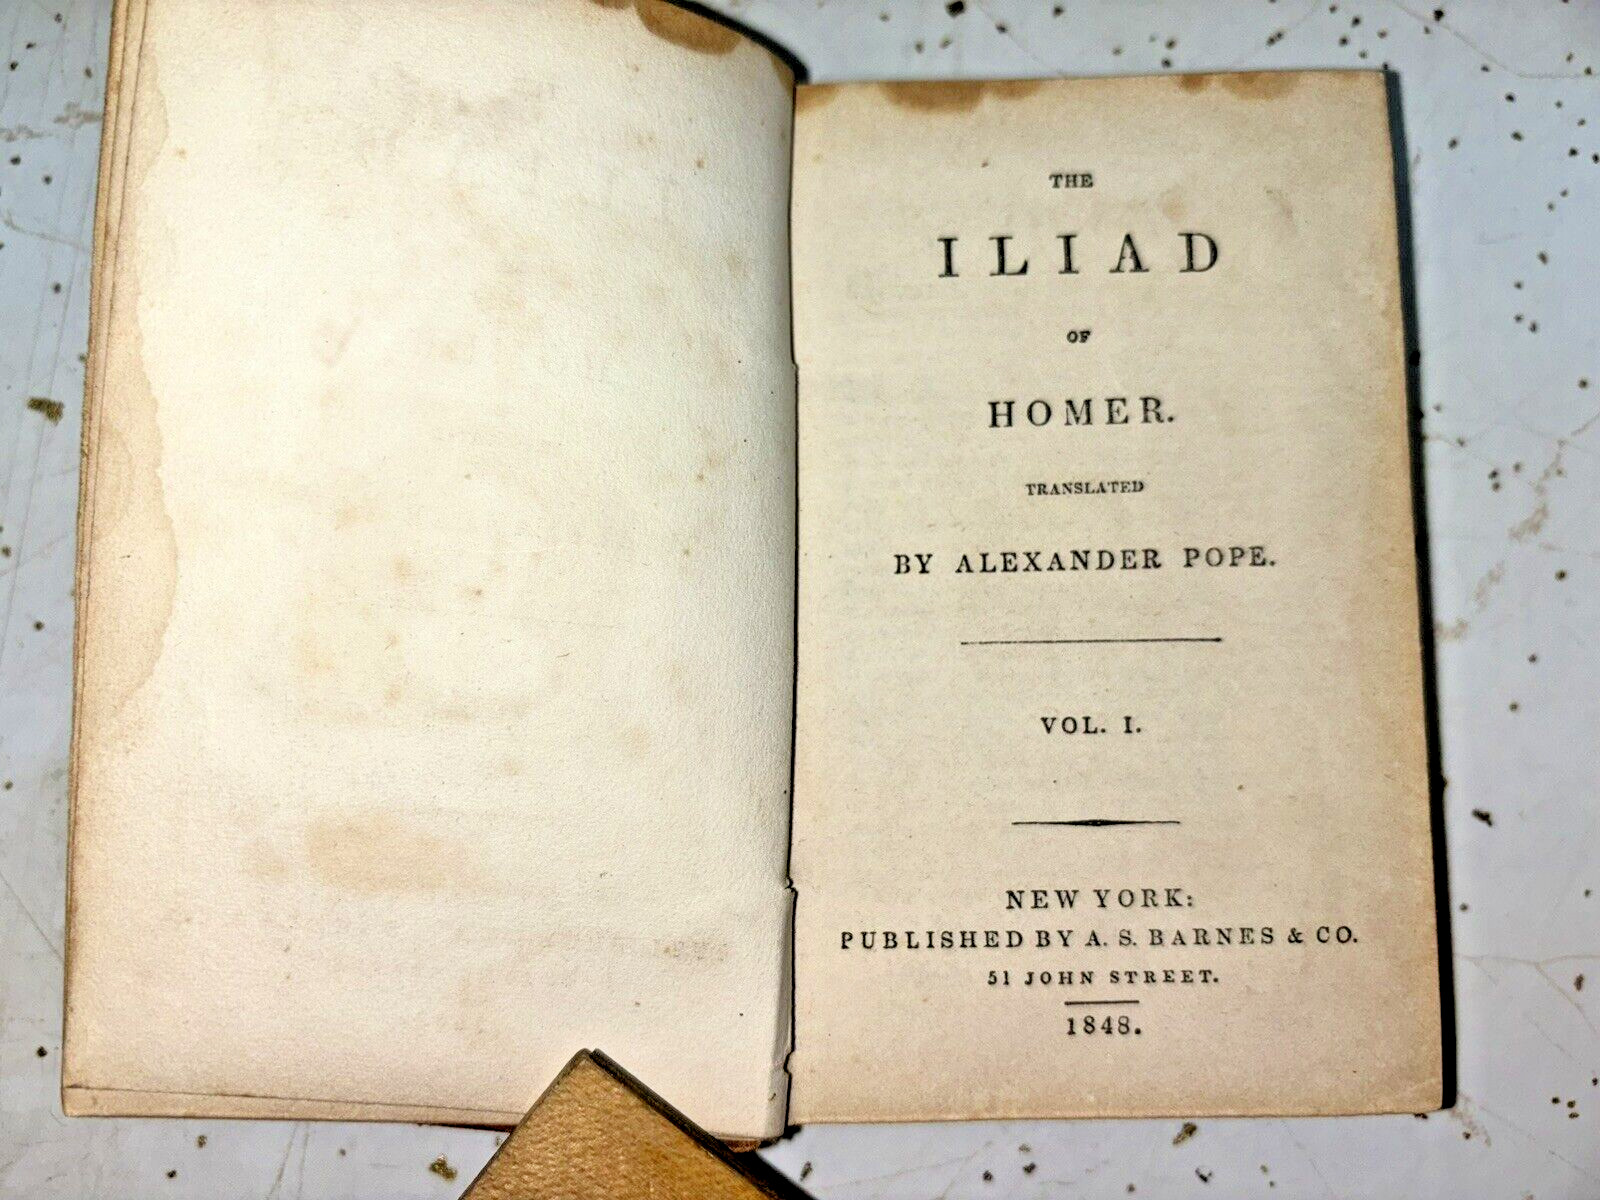 Antique 1848 Book: \'The Iliad of Homer. Translated by Alexander Pope. Vol. I.\'